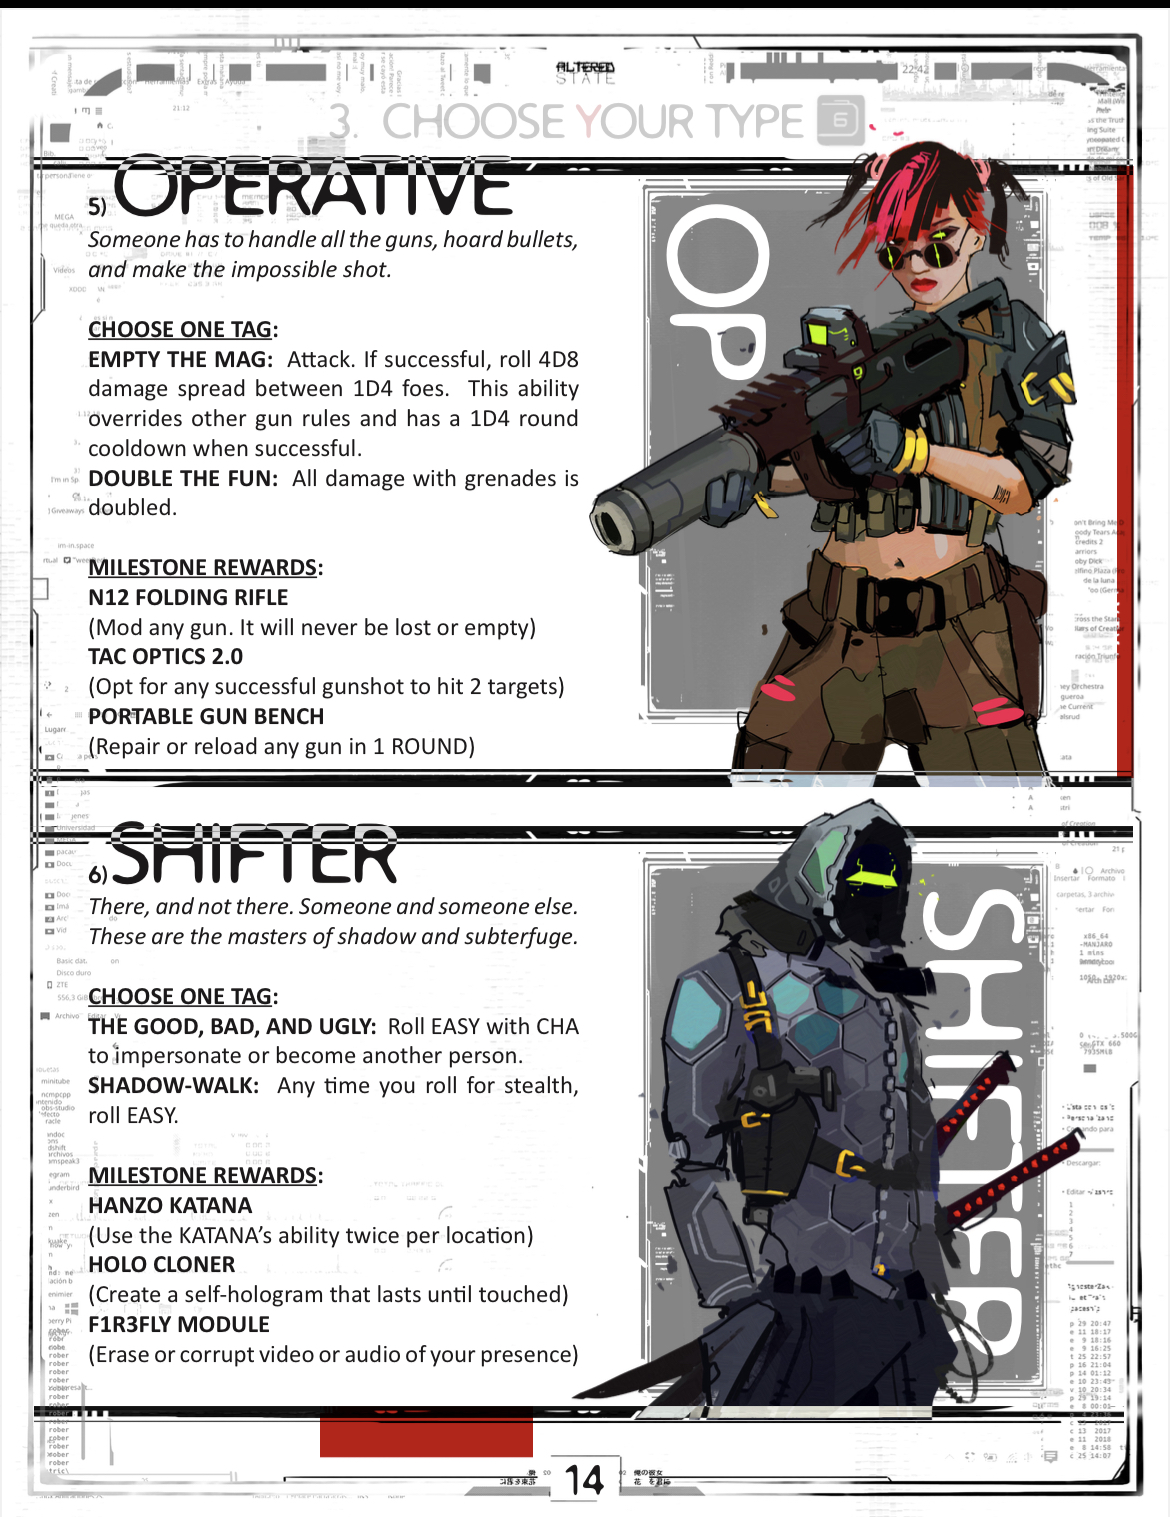 Corrupted Mod characters I made